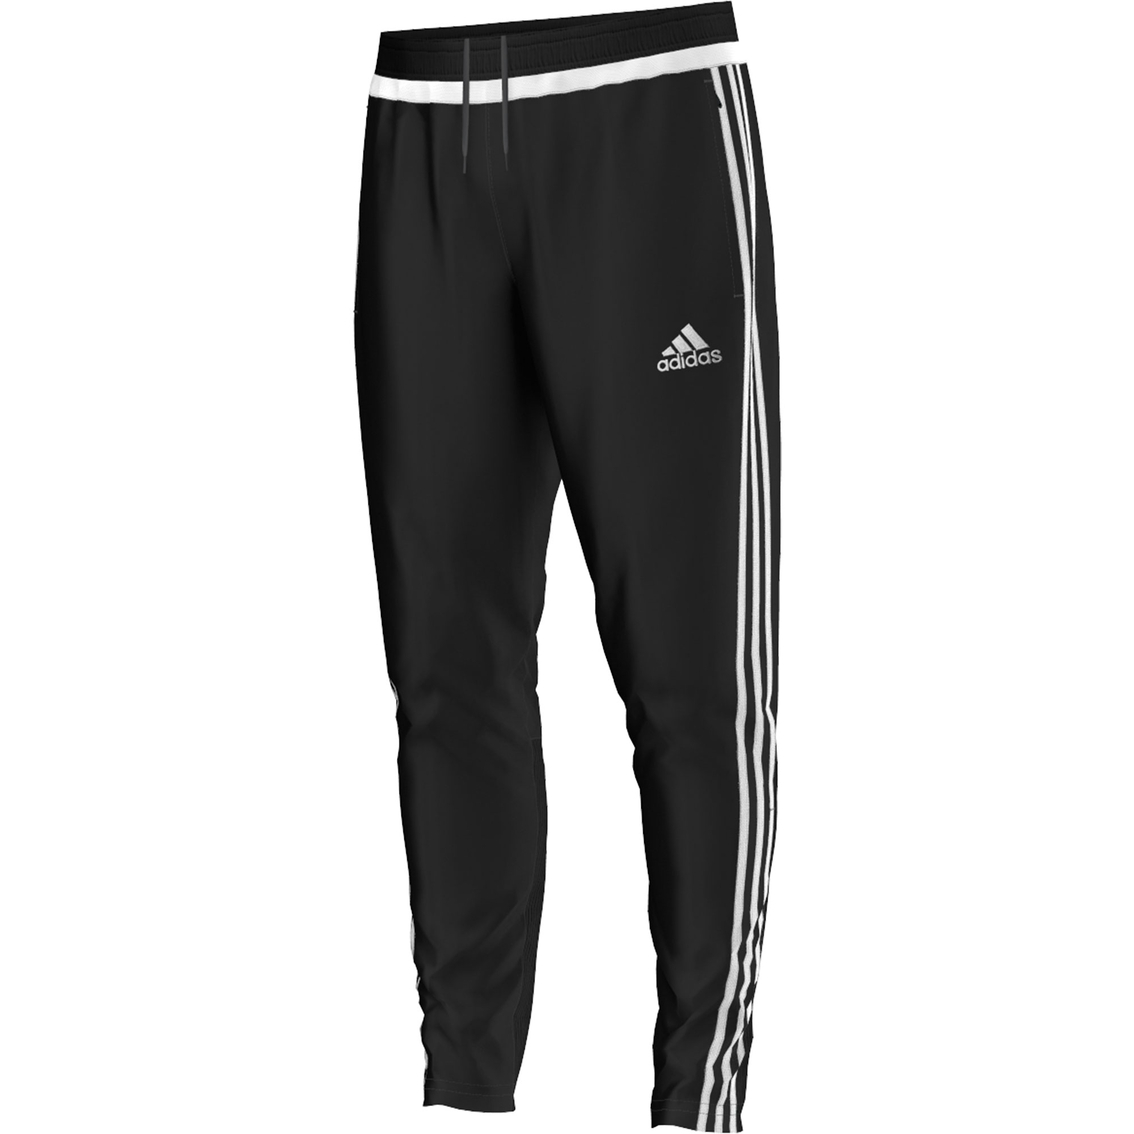 Adidas Tiro 15 Soccer Pants | Pants | Clothing & Accessories Shop The Exchange